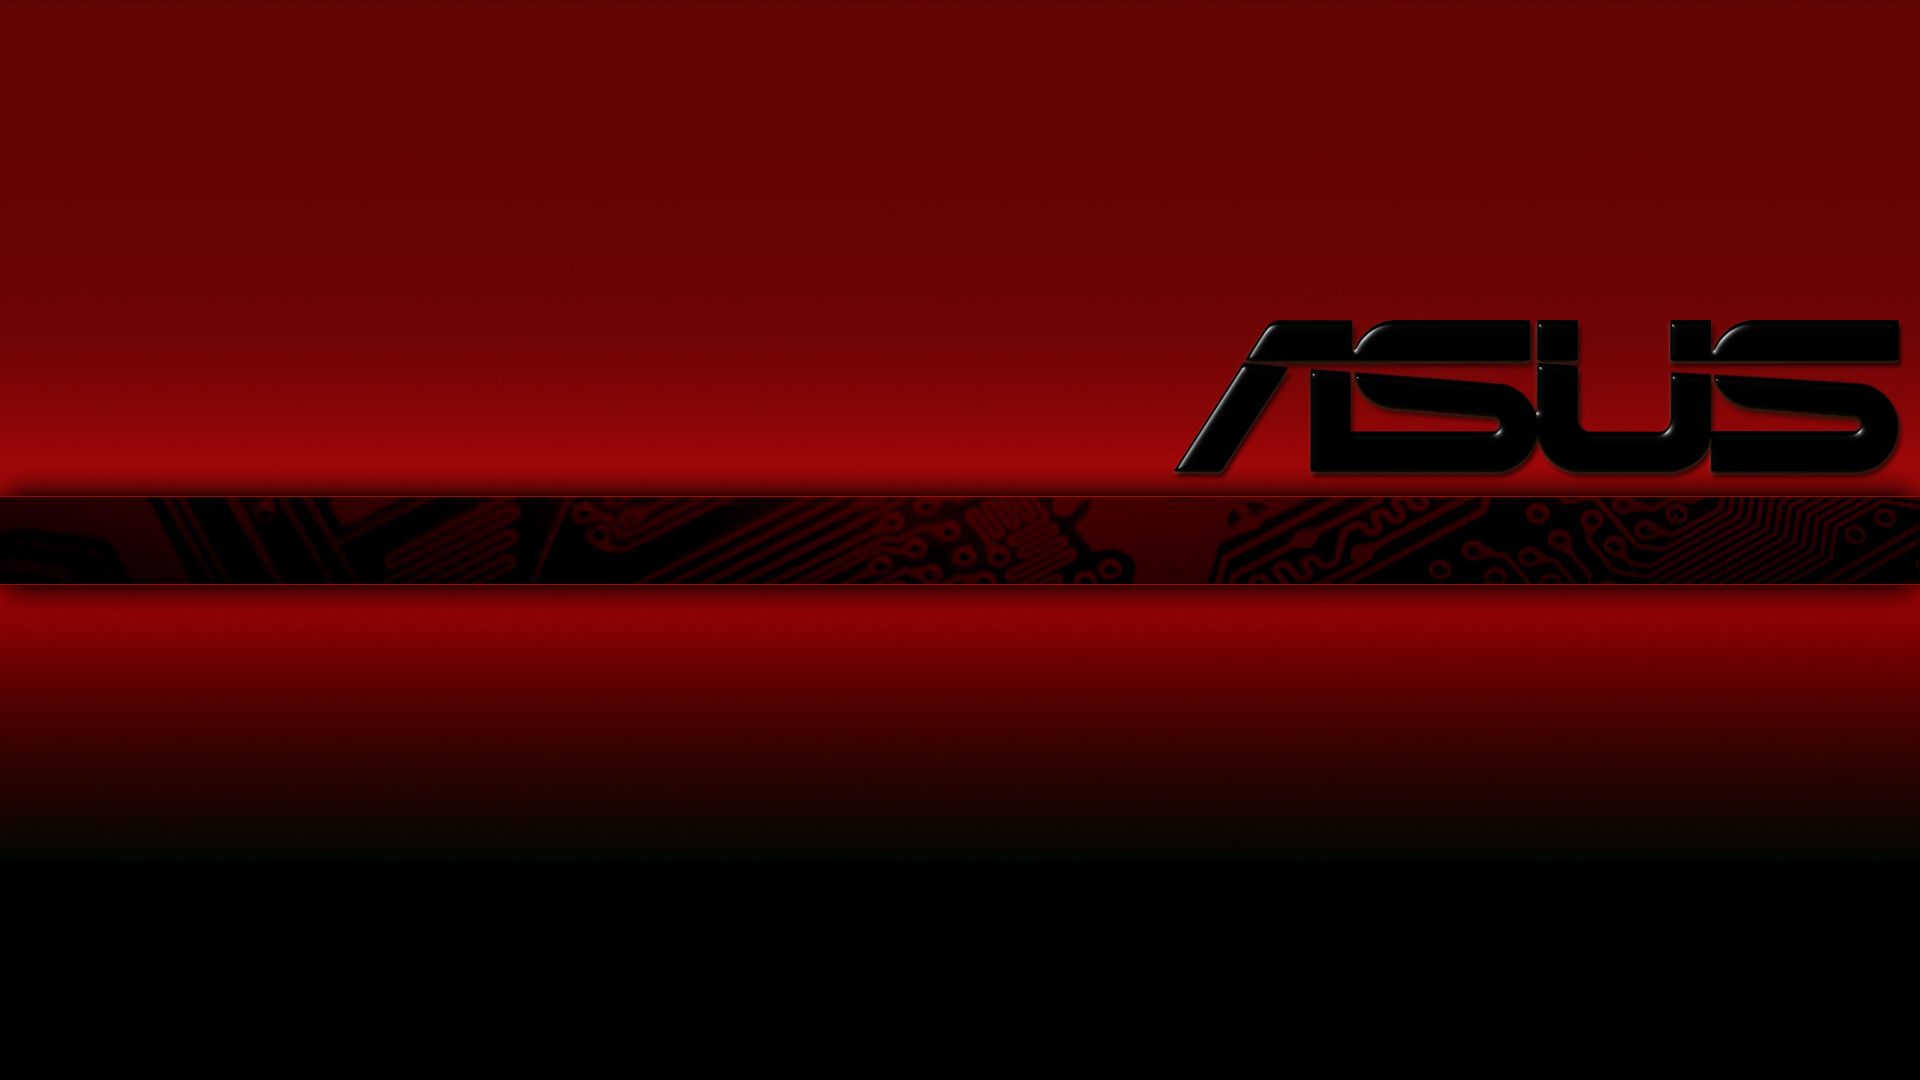 Red And Black Background - Red Hd Wallpaper For Desktop Csgo - HD Wallpaper 